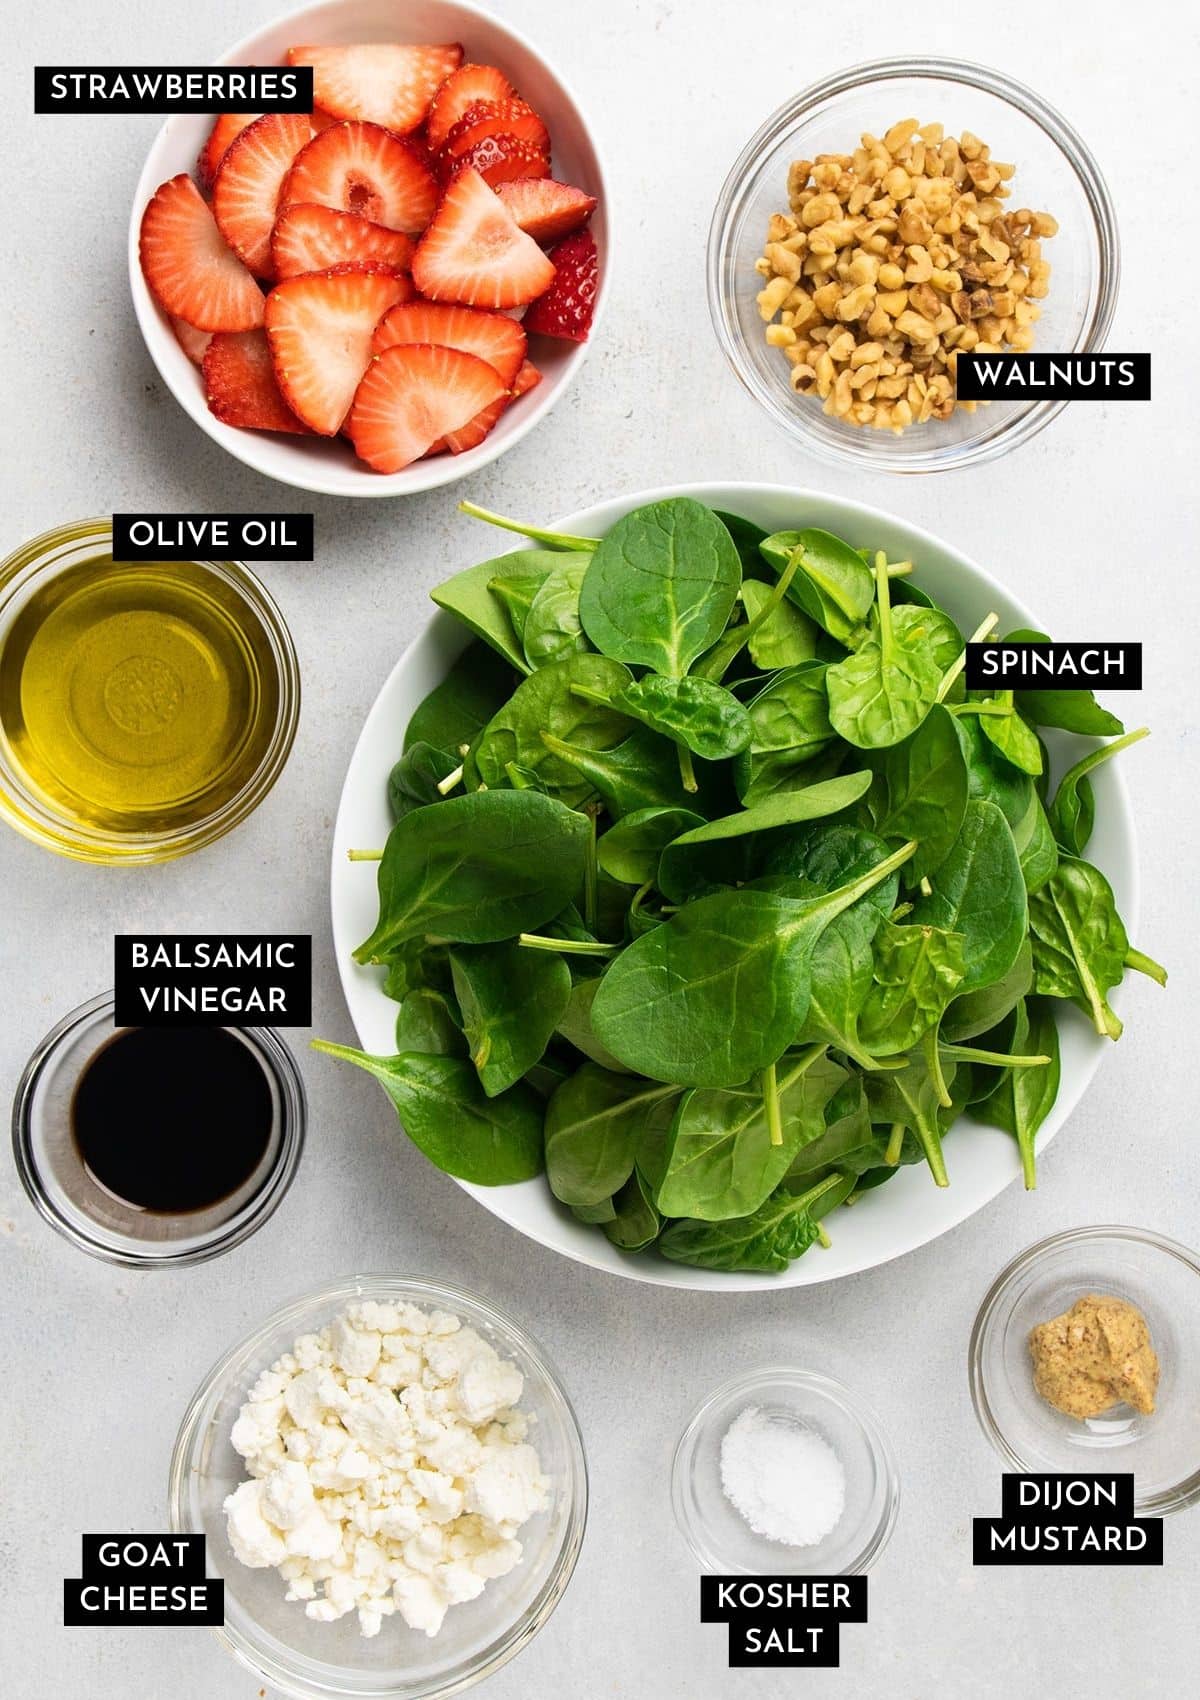 Spinach salad ingredients, organized into individual bowls.